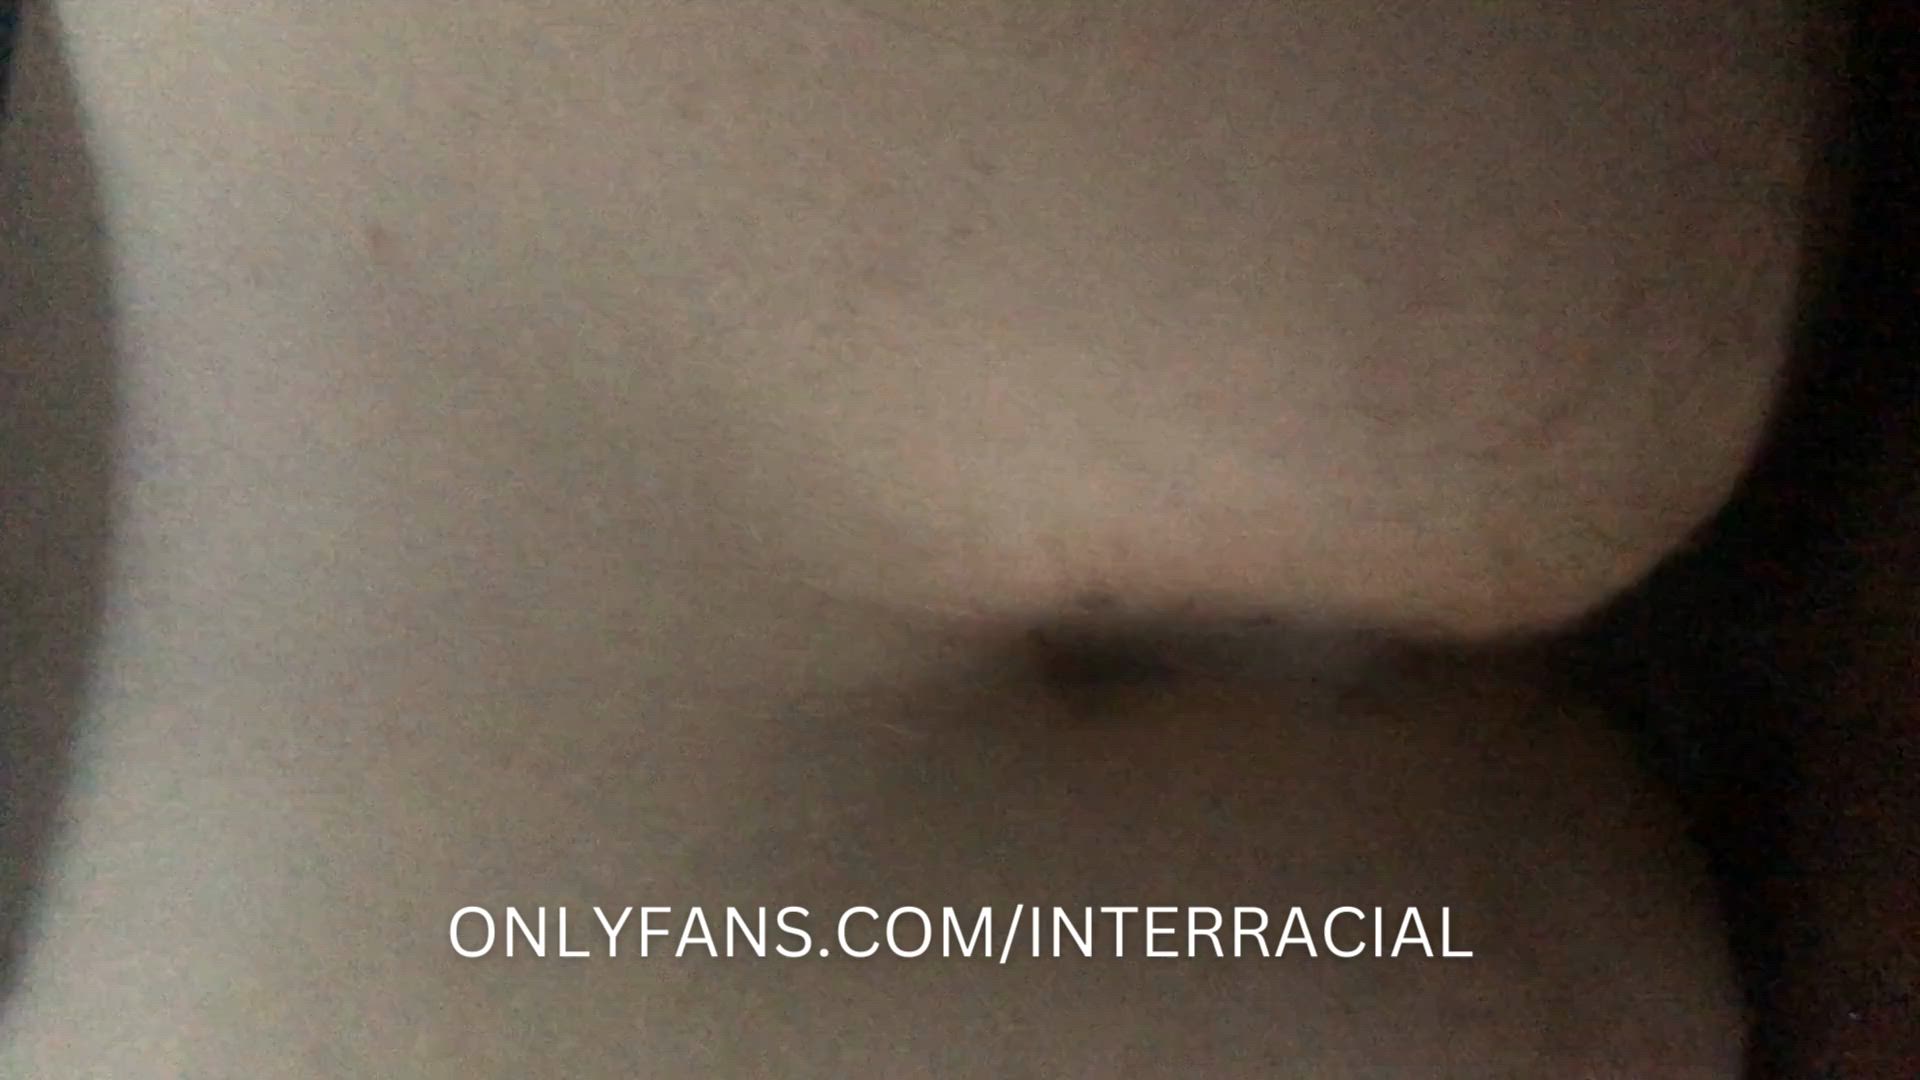 Interracial porn video with onlyfans model interracial <strong>@interracial</strong>